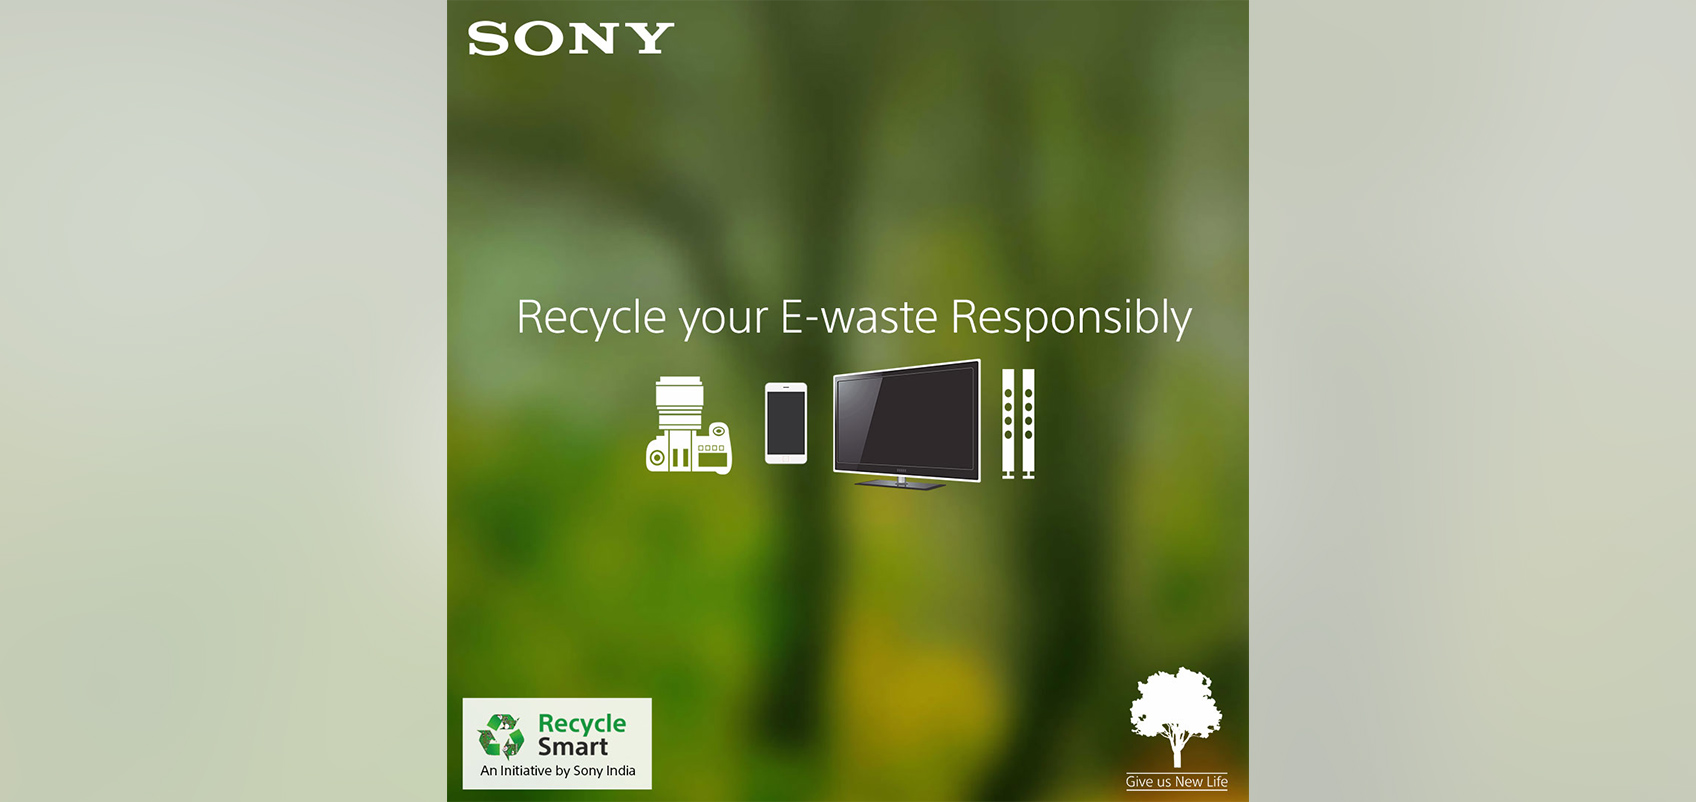 The words "Recycle your E-waste Responsibly" is written above illustrations of an electronic devices